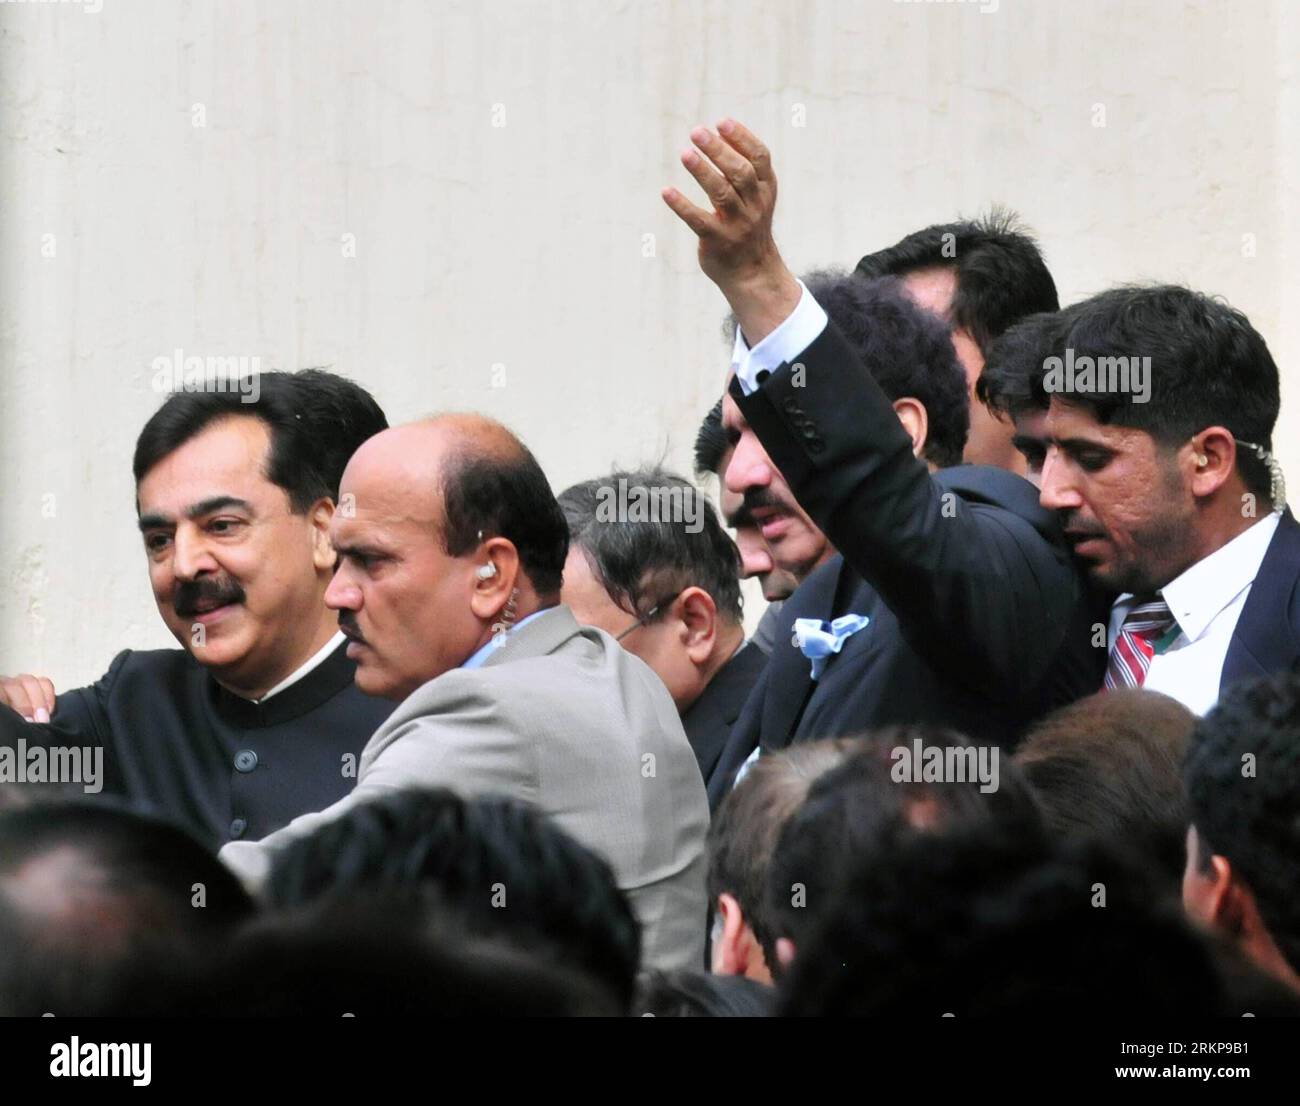 Bildnummer: 57934137  Datum: 26.04.2012  Copyright: imago/Xinhua (120426) -- ISLAMABAD, April 26, 2012 (Xinhua) -- Pakistani Prime Minister Yousuf Raza Gilani (L) is escorted by security as he leaves the Supreme Court after a verdict in Islamabad, capital of Pakistan on April 26, 2012. Pakistan s Supreme Court on Thursday found Prime Minister Yusuf Raza Gilani guilty of contempt of court for failing to act on its directives to reopen graft cases against President Asif Ali Zardari. (Xinhua/Ahmad Kamal) (ybg) PAKISTAN-PRIME MINISTER-GUILTY OF CONTEMPT OF COURT PUBLICATIONxNOTxINxCHN People Polit Stock Photo